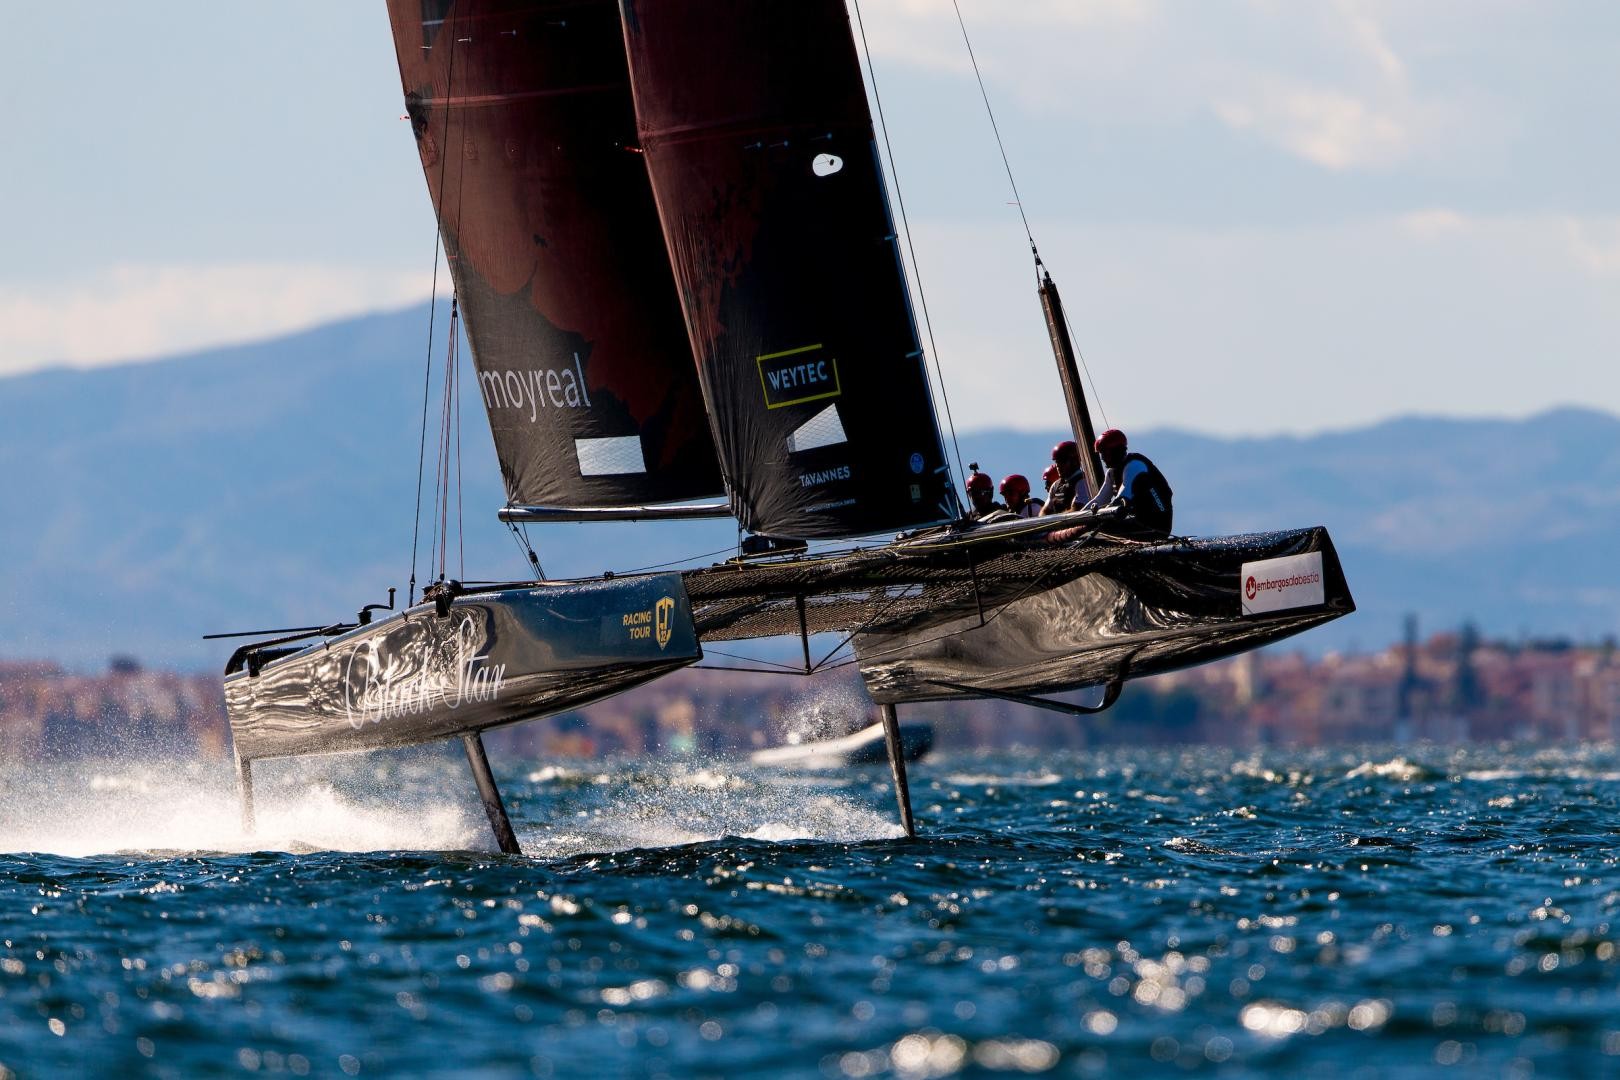 Black Star Sailing Team 'recovered best' among the teams. Photo: Sailing Energy / GC32 Racing Tour